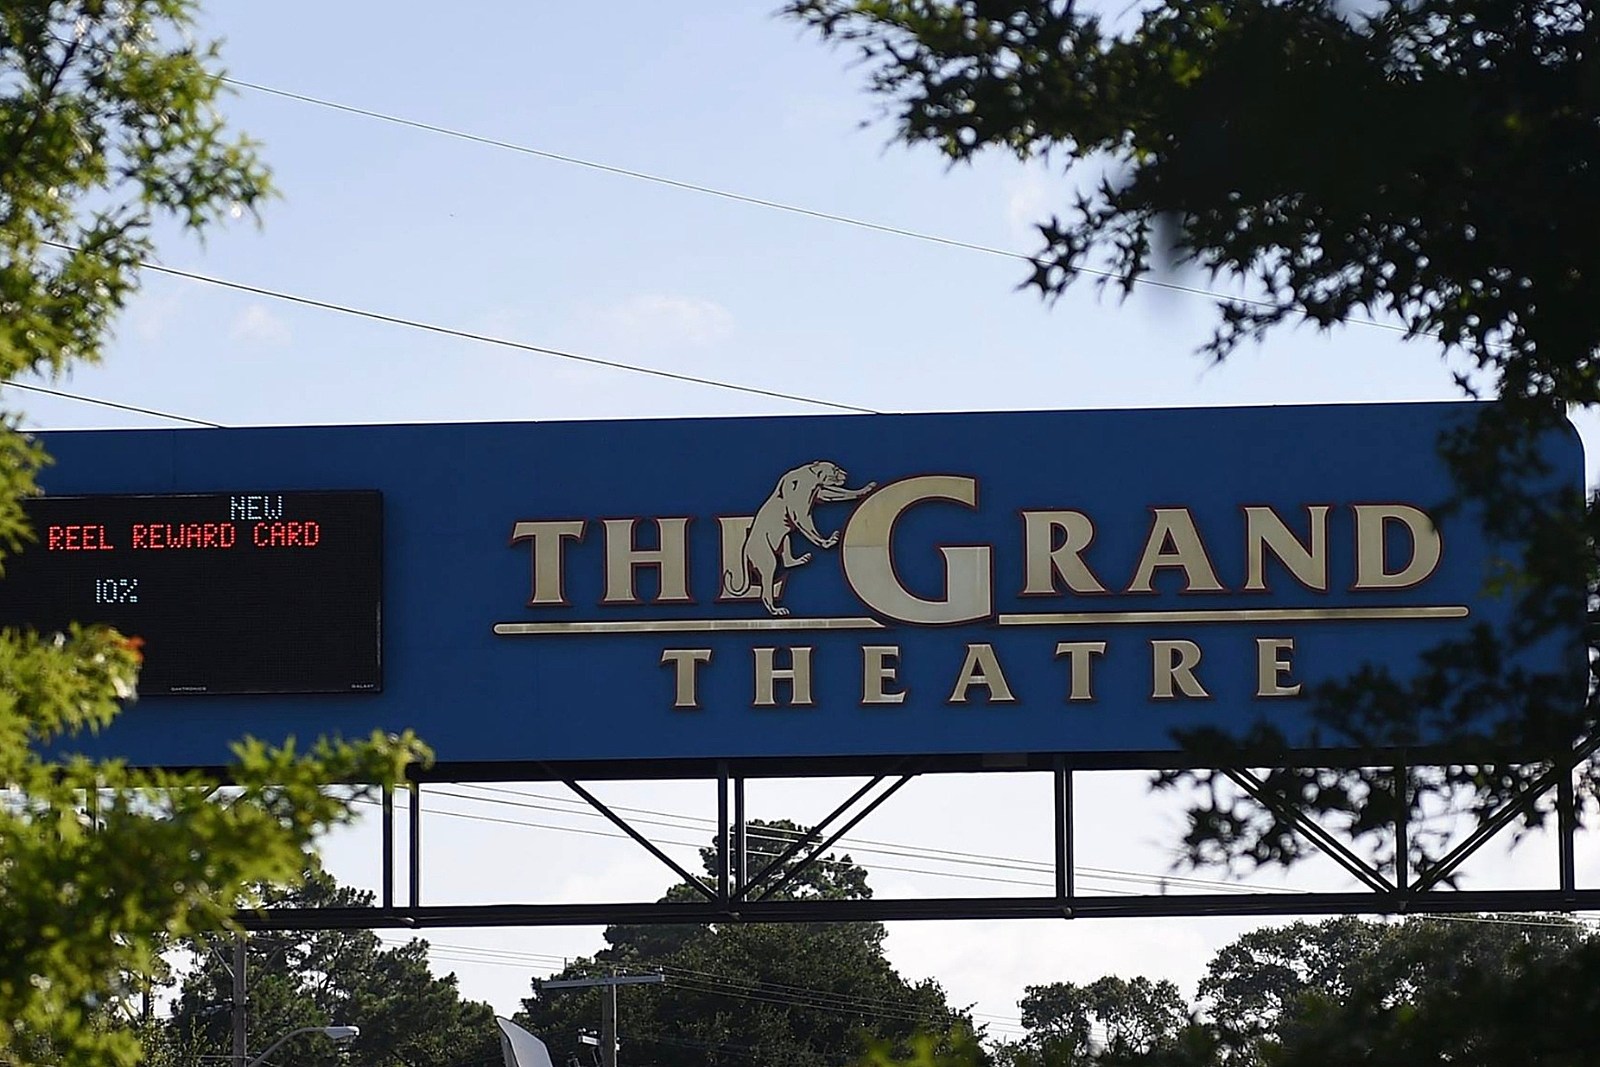 Lafayettes Grand Movie Theater Chain Changes Ownership pic